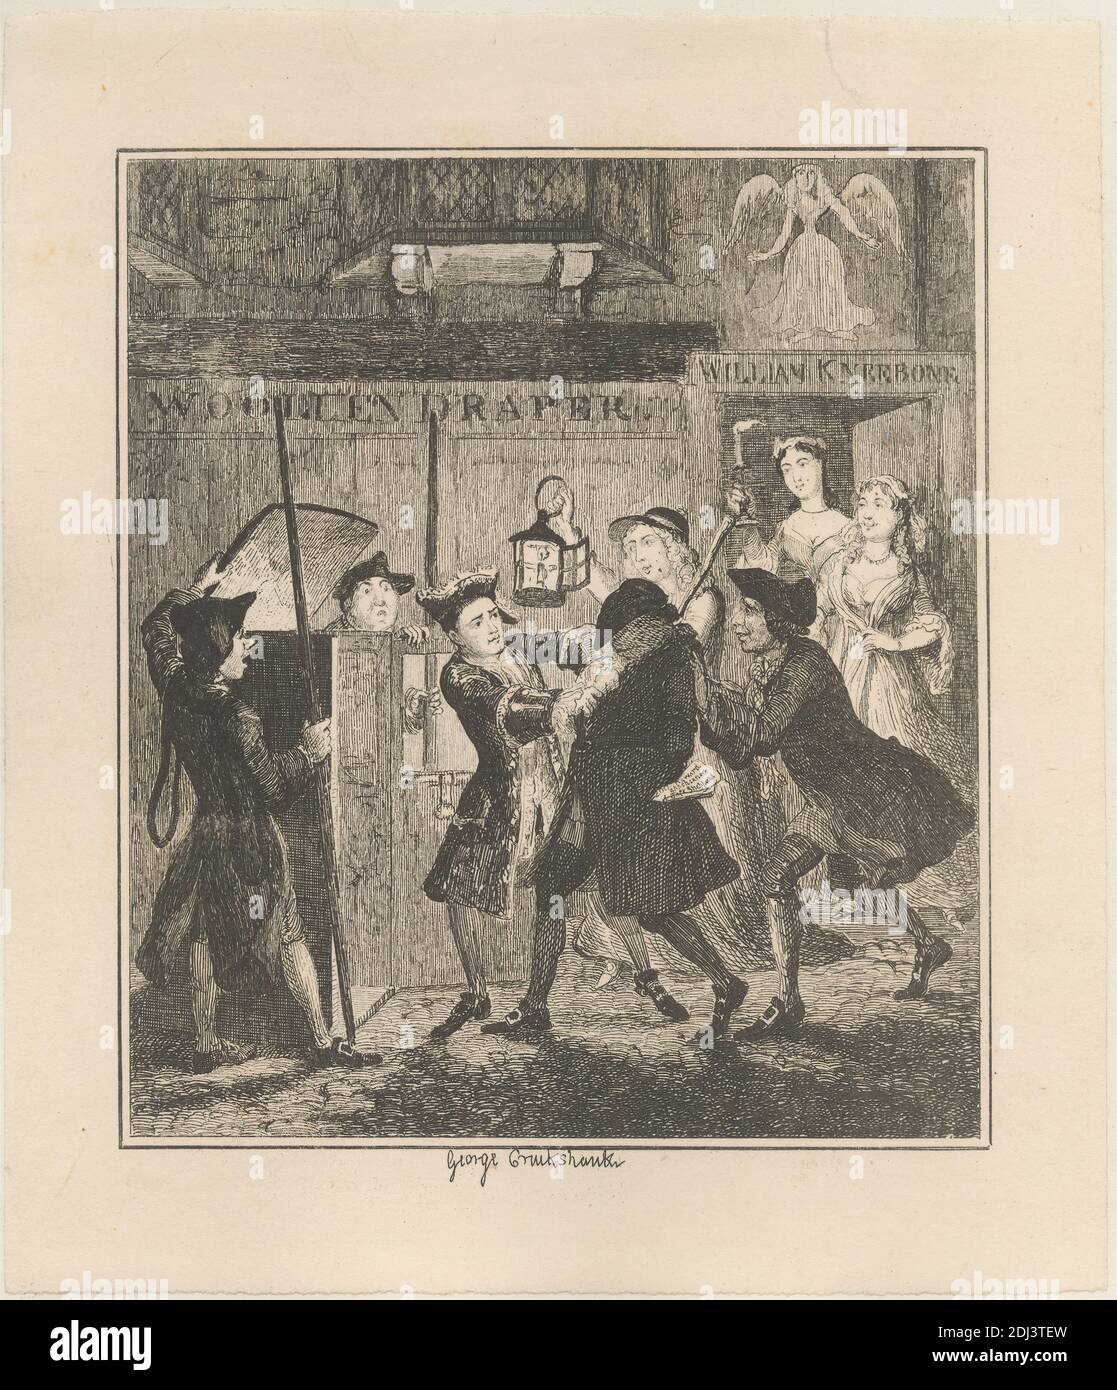 Jack Sheppard Tricking Shotbolt, the Gaoler, Print made by George Cruikshank, 1792–1878, British, 1839, Etching on moderately thick, smooth, cream wove paper with beige chine collé, Sheet: 8 7/16 x 7 9/16 inches (21.4 x 19.2 cm), Plate: 7 1/16 x 5 7/8 inches (18 x 15 cm), Sheet: 5 11/16 x 4 7/8 inches (14.4 x 12.4 cm), and Image: 4 3/8 x 3 3/4 inches (11.1 x 9.6 cm), angry, Chapter 13 - 'The Supper at Mr. Kneebone's', correctional institution, criminals, Epoch the Third: 'The Prison-Breaker.', gaoler, genre subject, historical subject, illustration, Jack Sheppard (novel), jail, lanterns, men Stock Photo